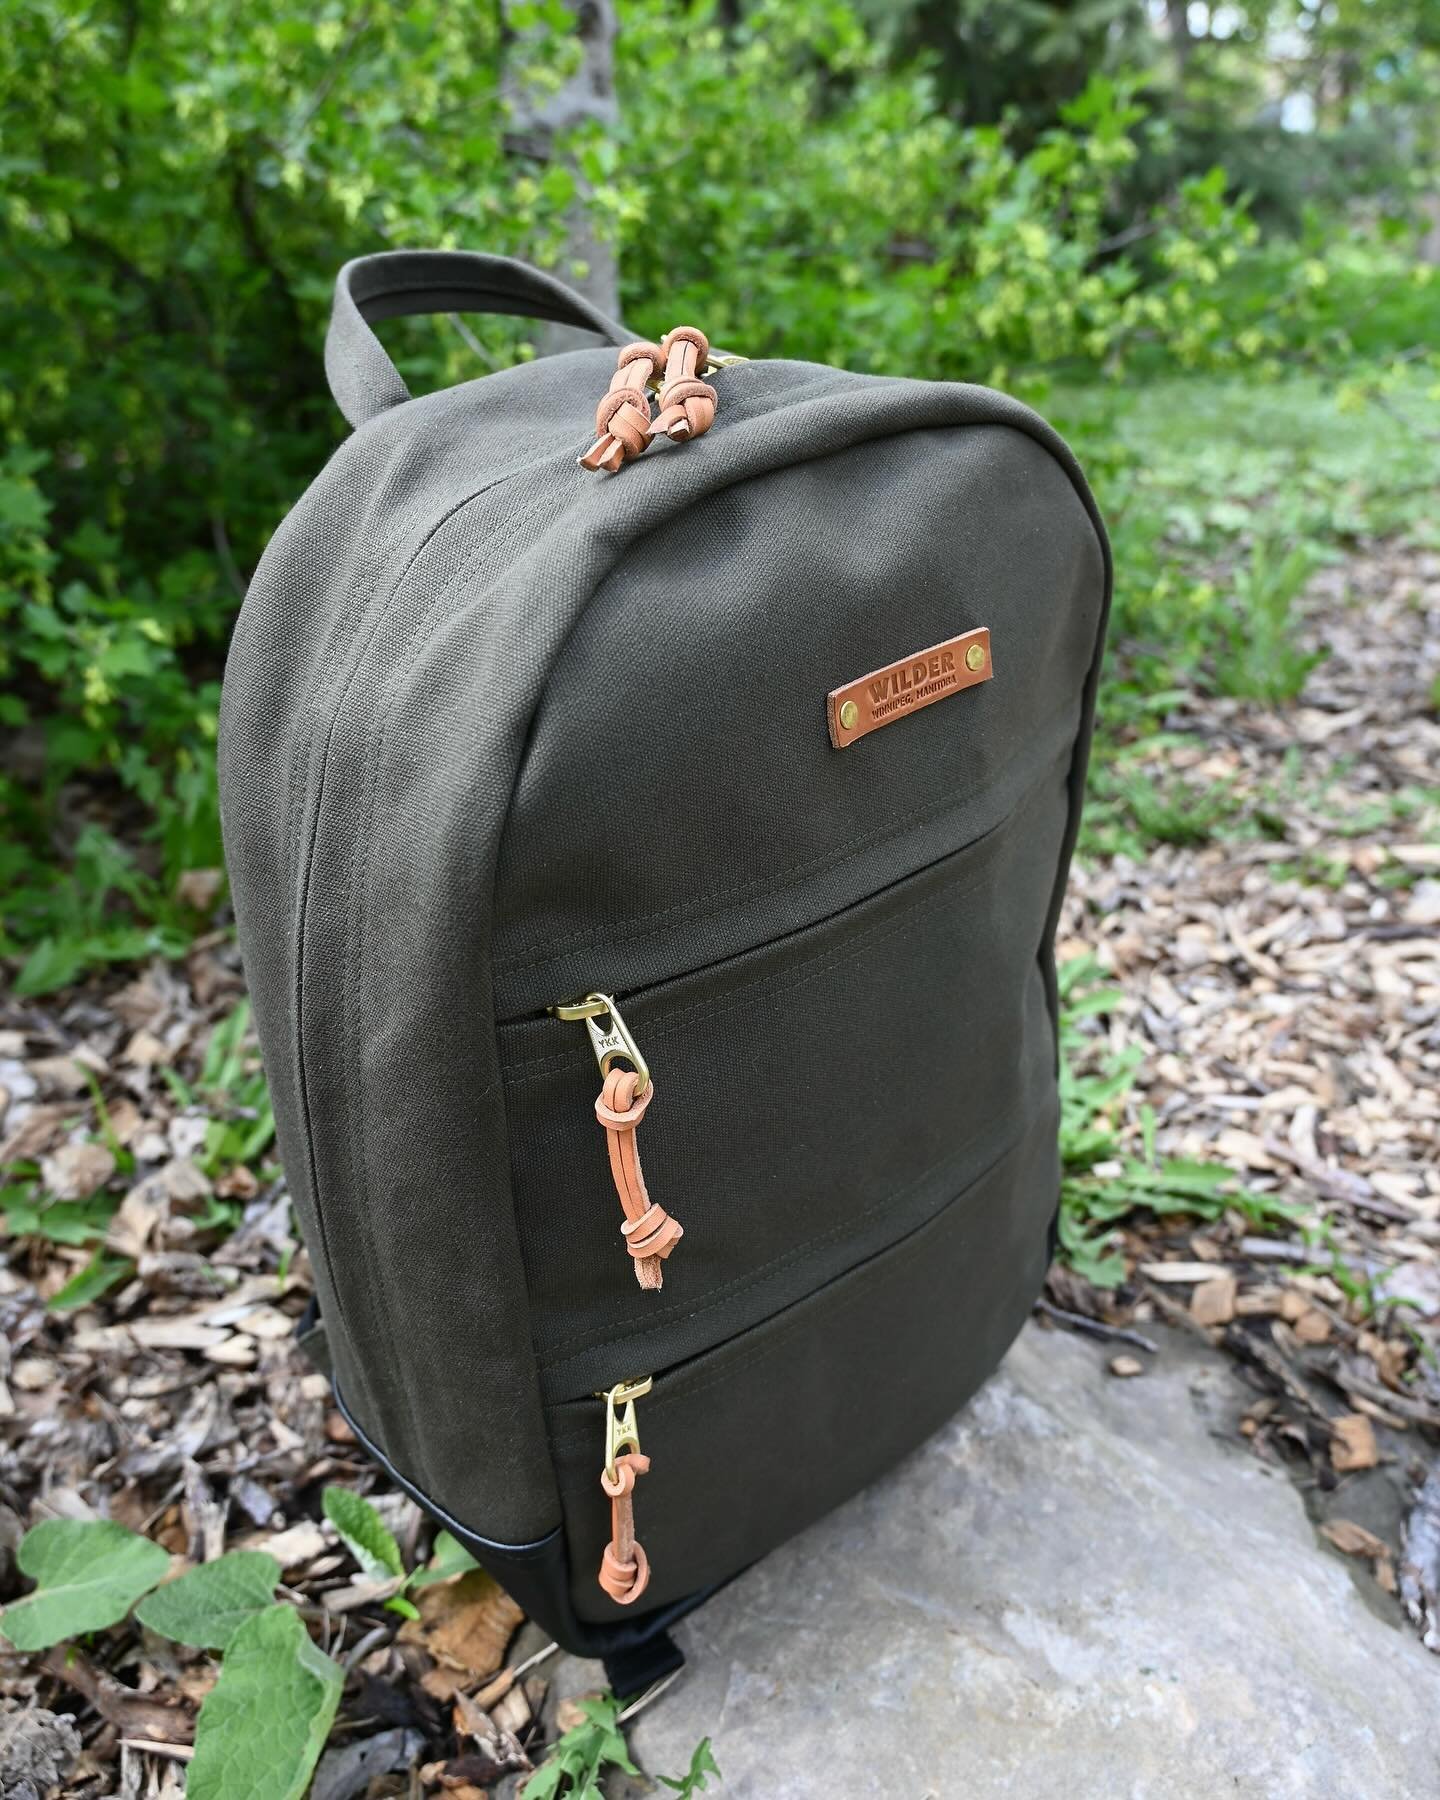 🌱🌱 Back by popular demand - the &ldquo;normcore&rdquo; as we call it, is a sturdy daily-use backpack that has everything you need and nothing you don&rsquo;t. This bag is all about respecting those details 🧑&zwj;🍳💋🤌.